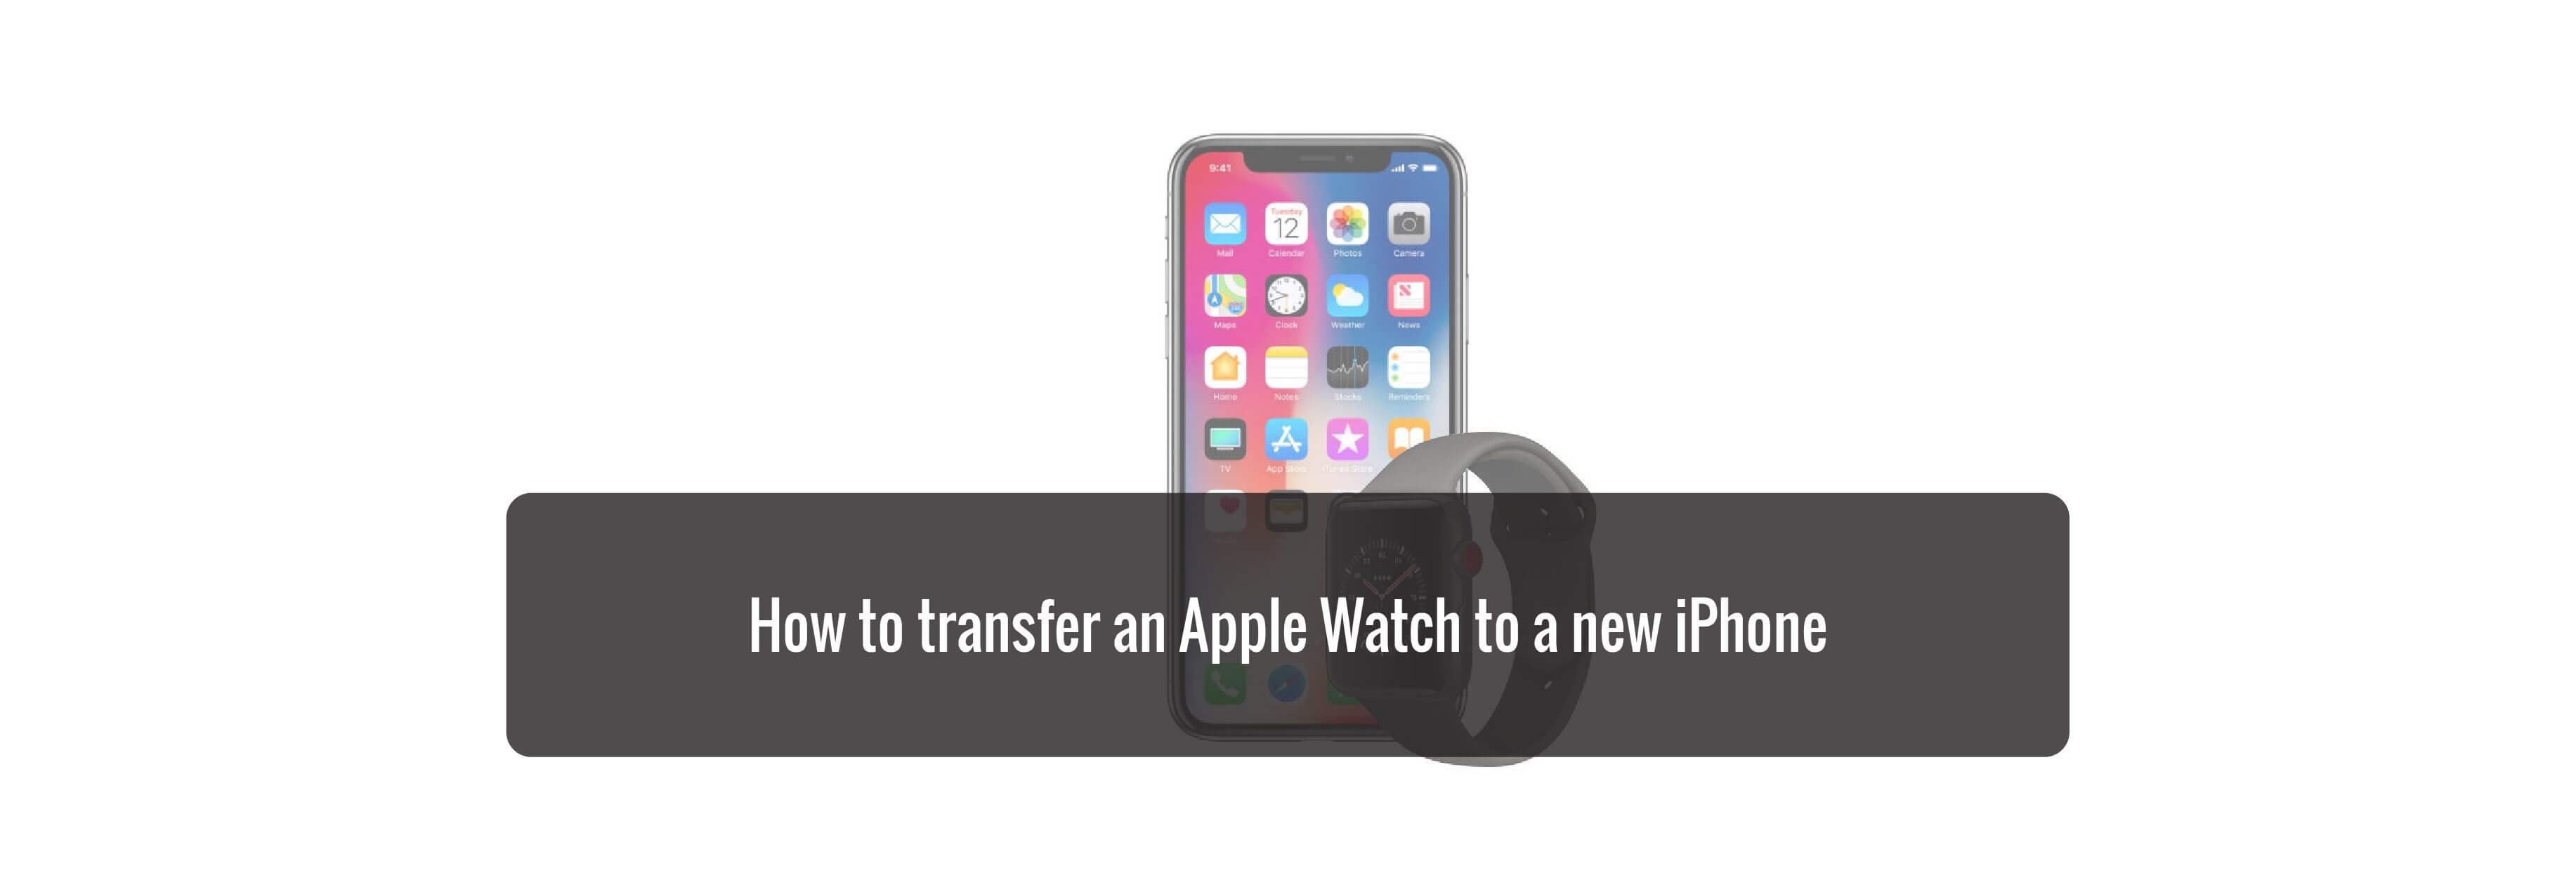 How to transfer an Apple Watch to a new iPhone